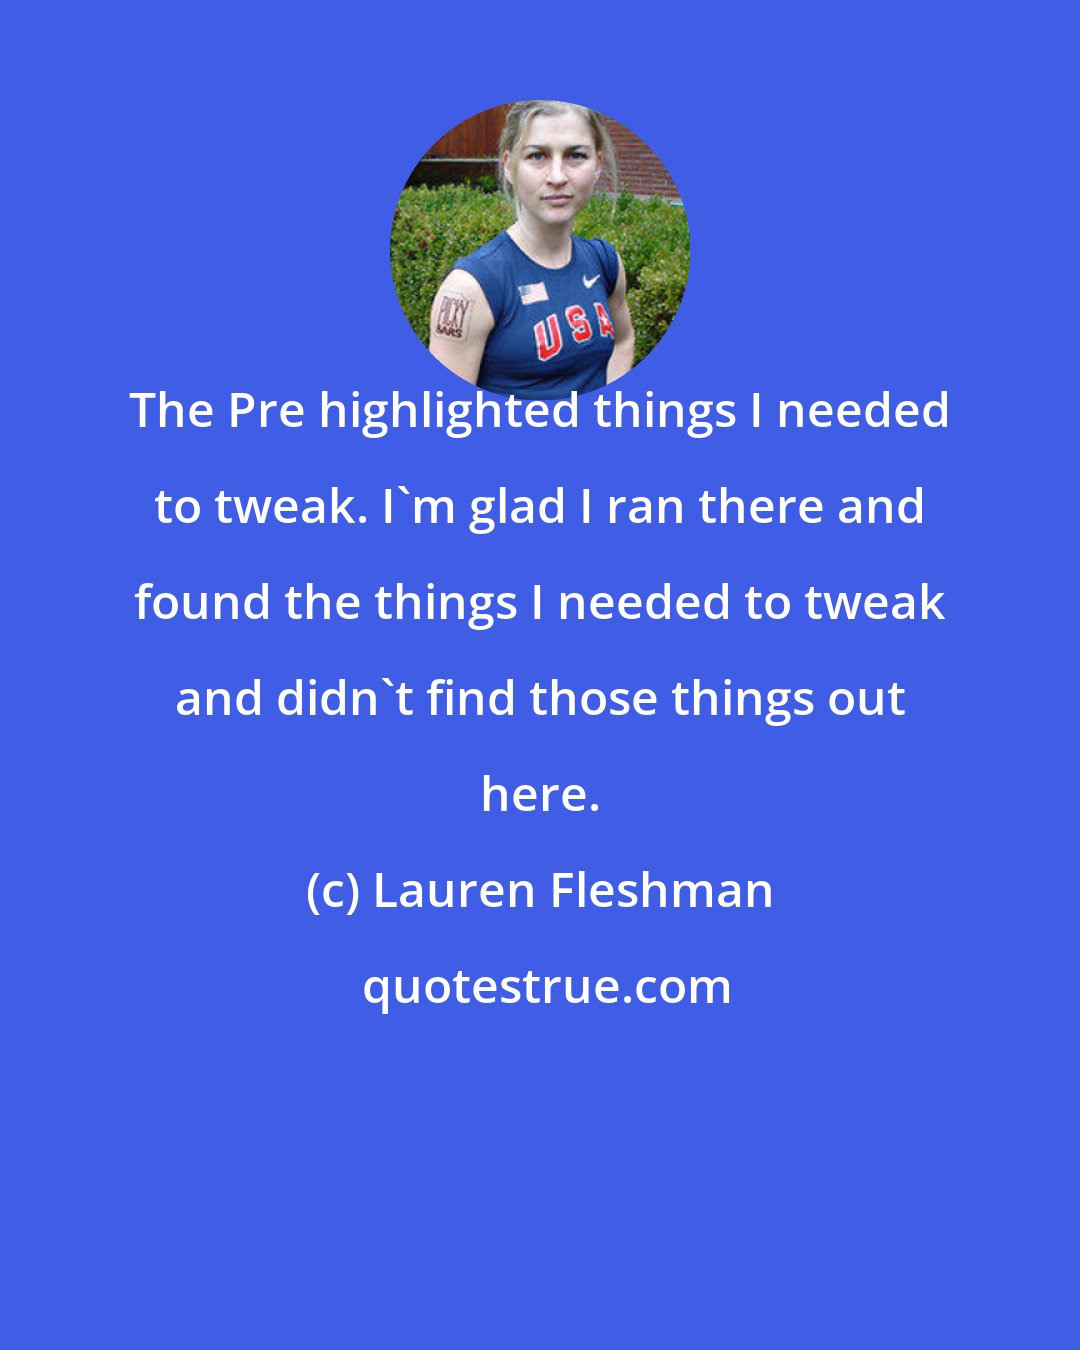 Lauren Fleshman: The Pre highlighted things I needed to tweak. I'm glad I ran there and found the things I needed to tweak and didn't find those things out here.